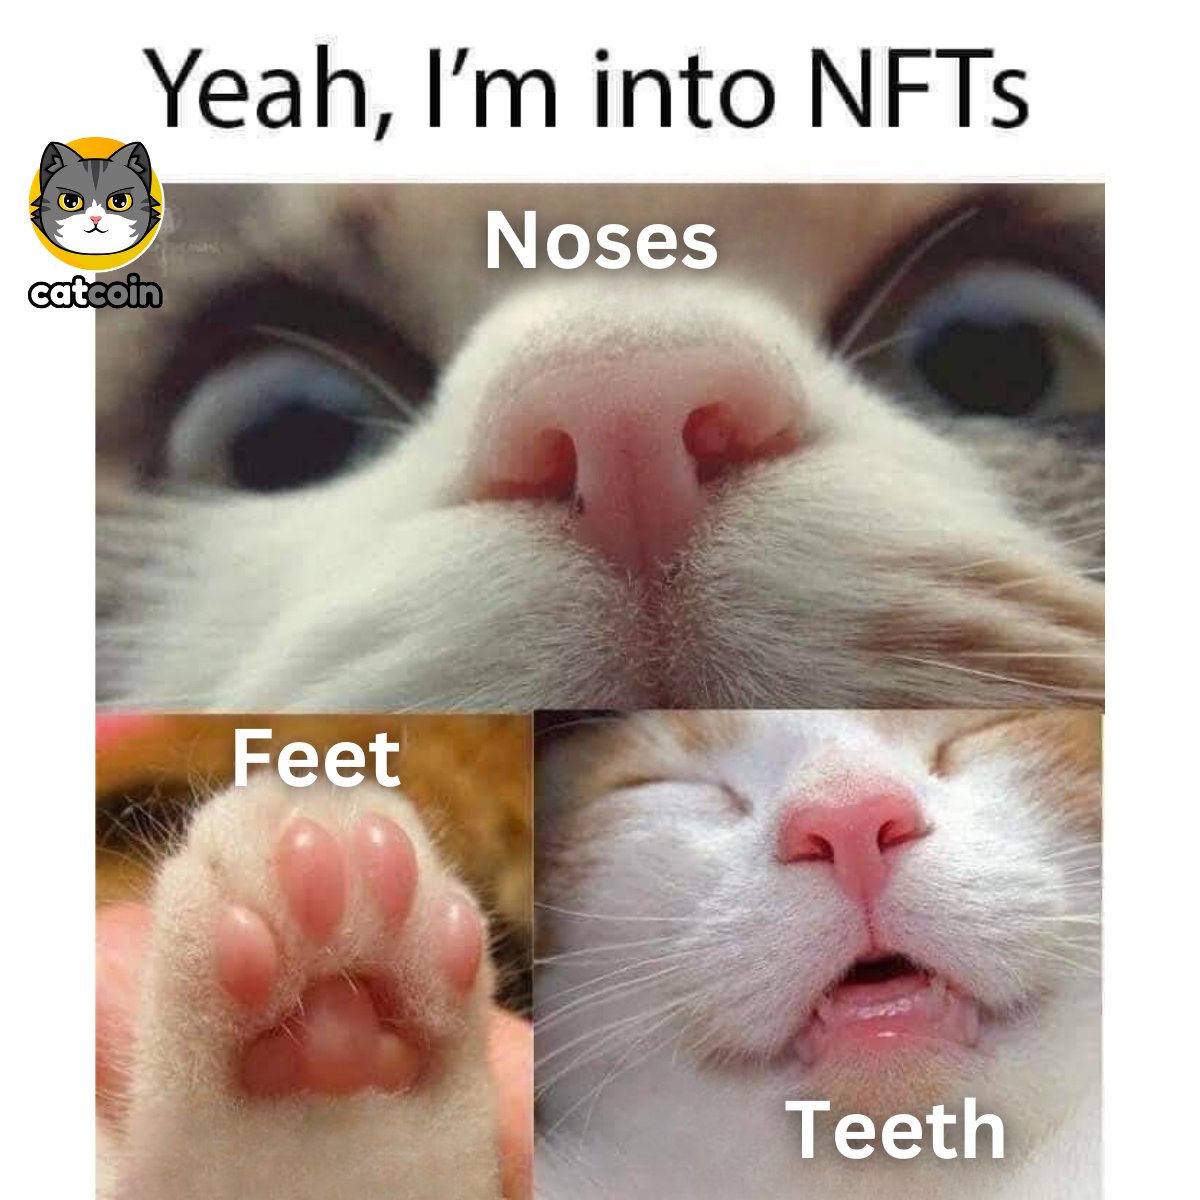 The #CatcoinArmy loves NFTs! 

#Catcoin $CATS